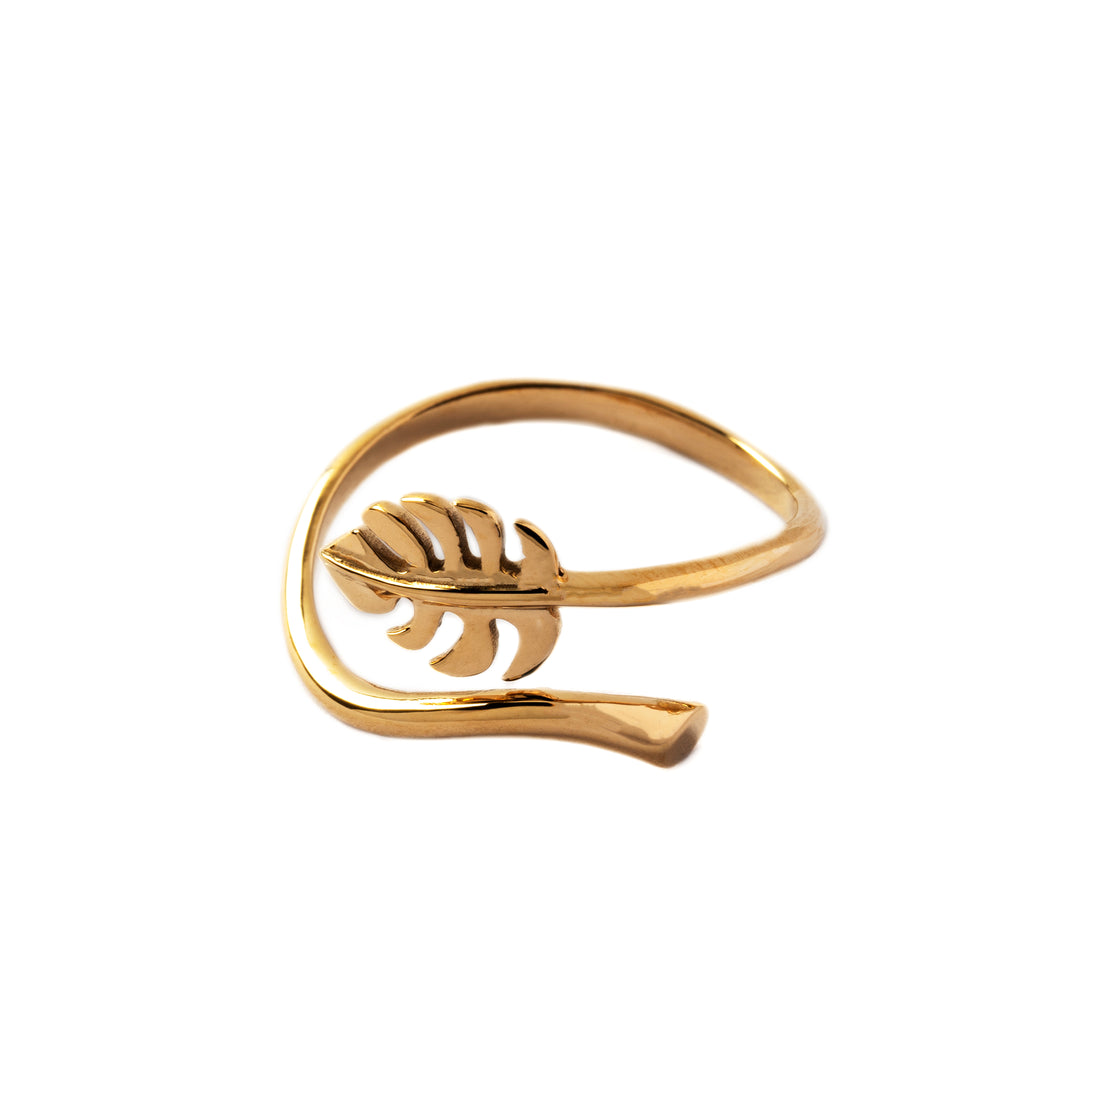 Bronze Monstera Ring right side view